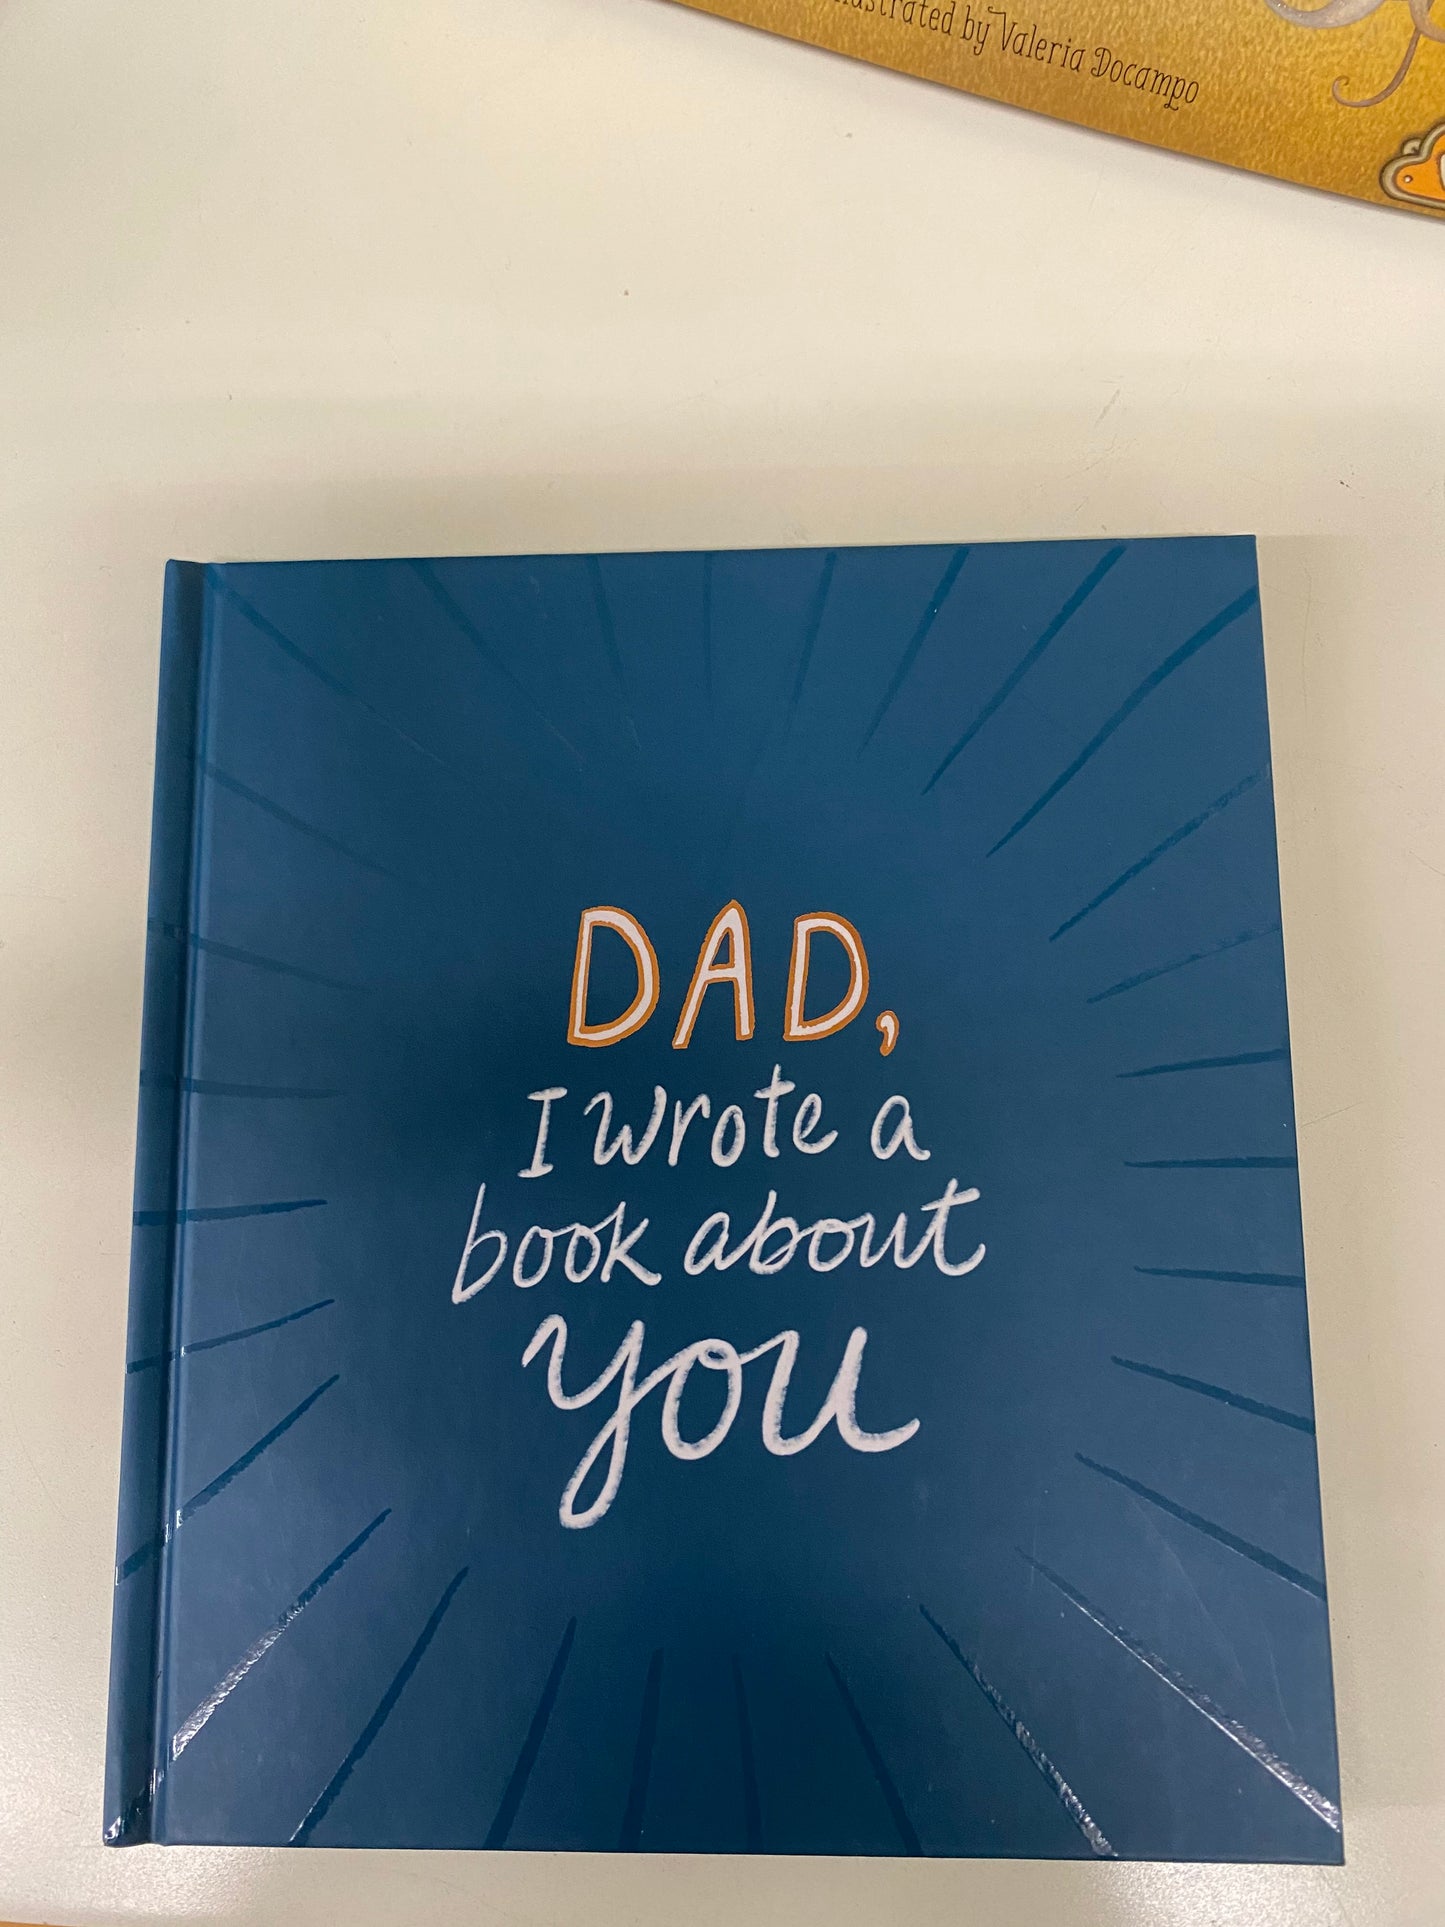 DAD, I WROTE A BOOK ABOUT YOU